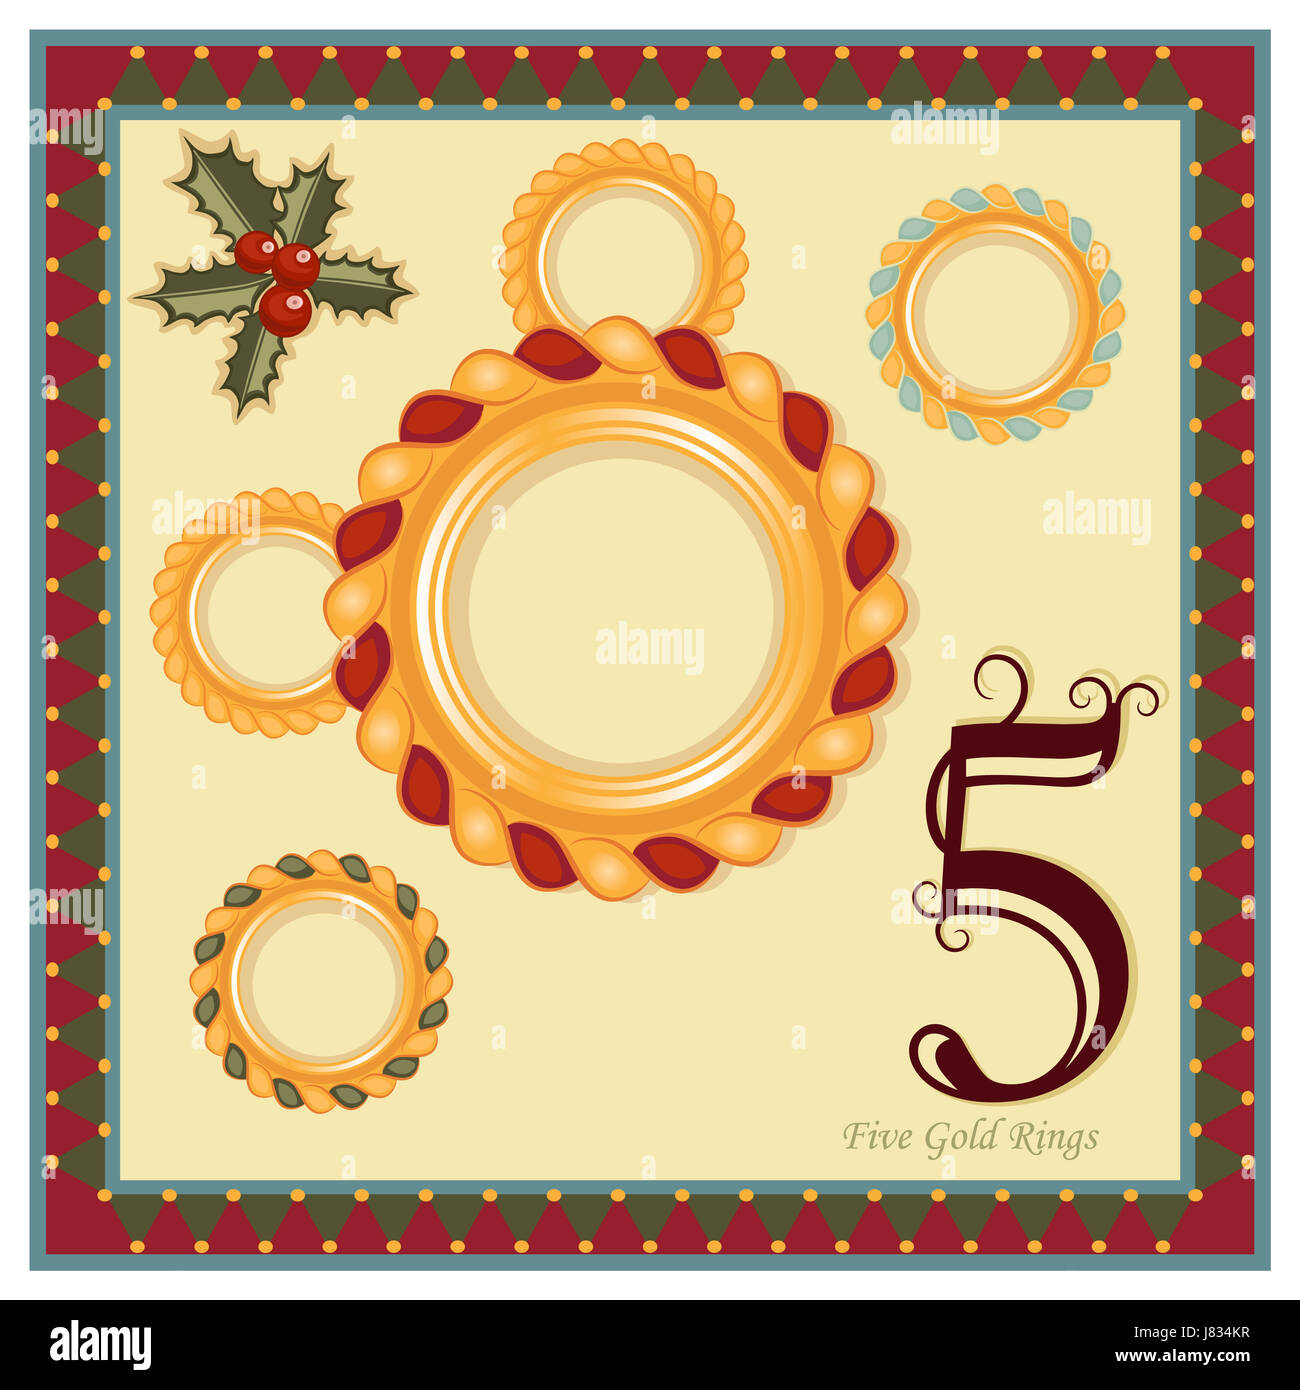 Twelve days of christmas illustration hi-res stock photography and images -  Alamy